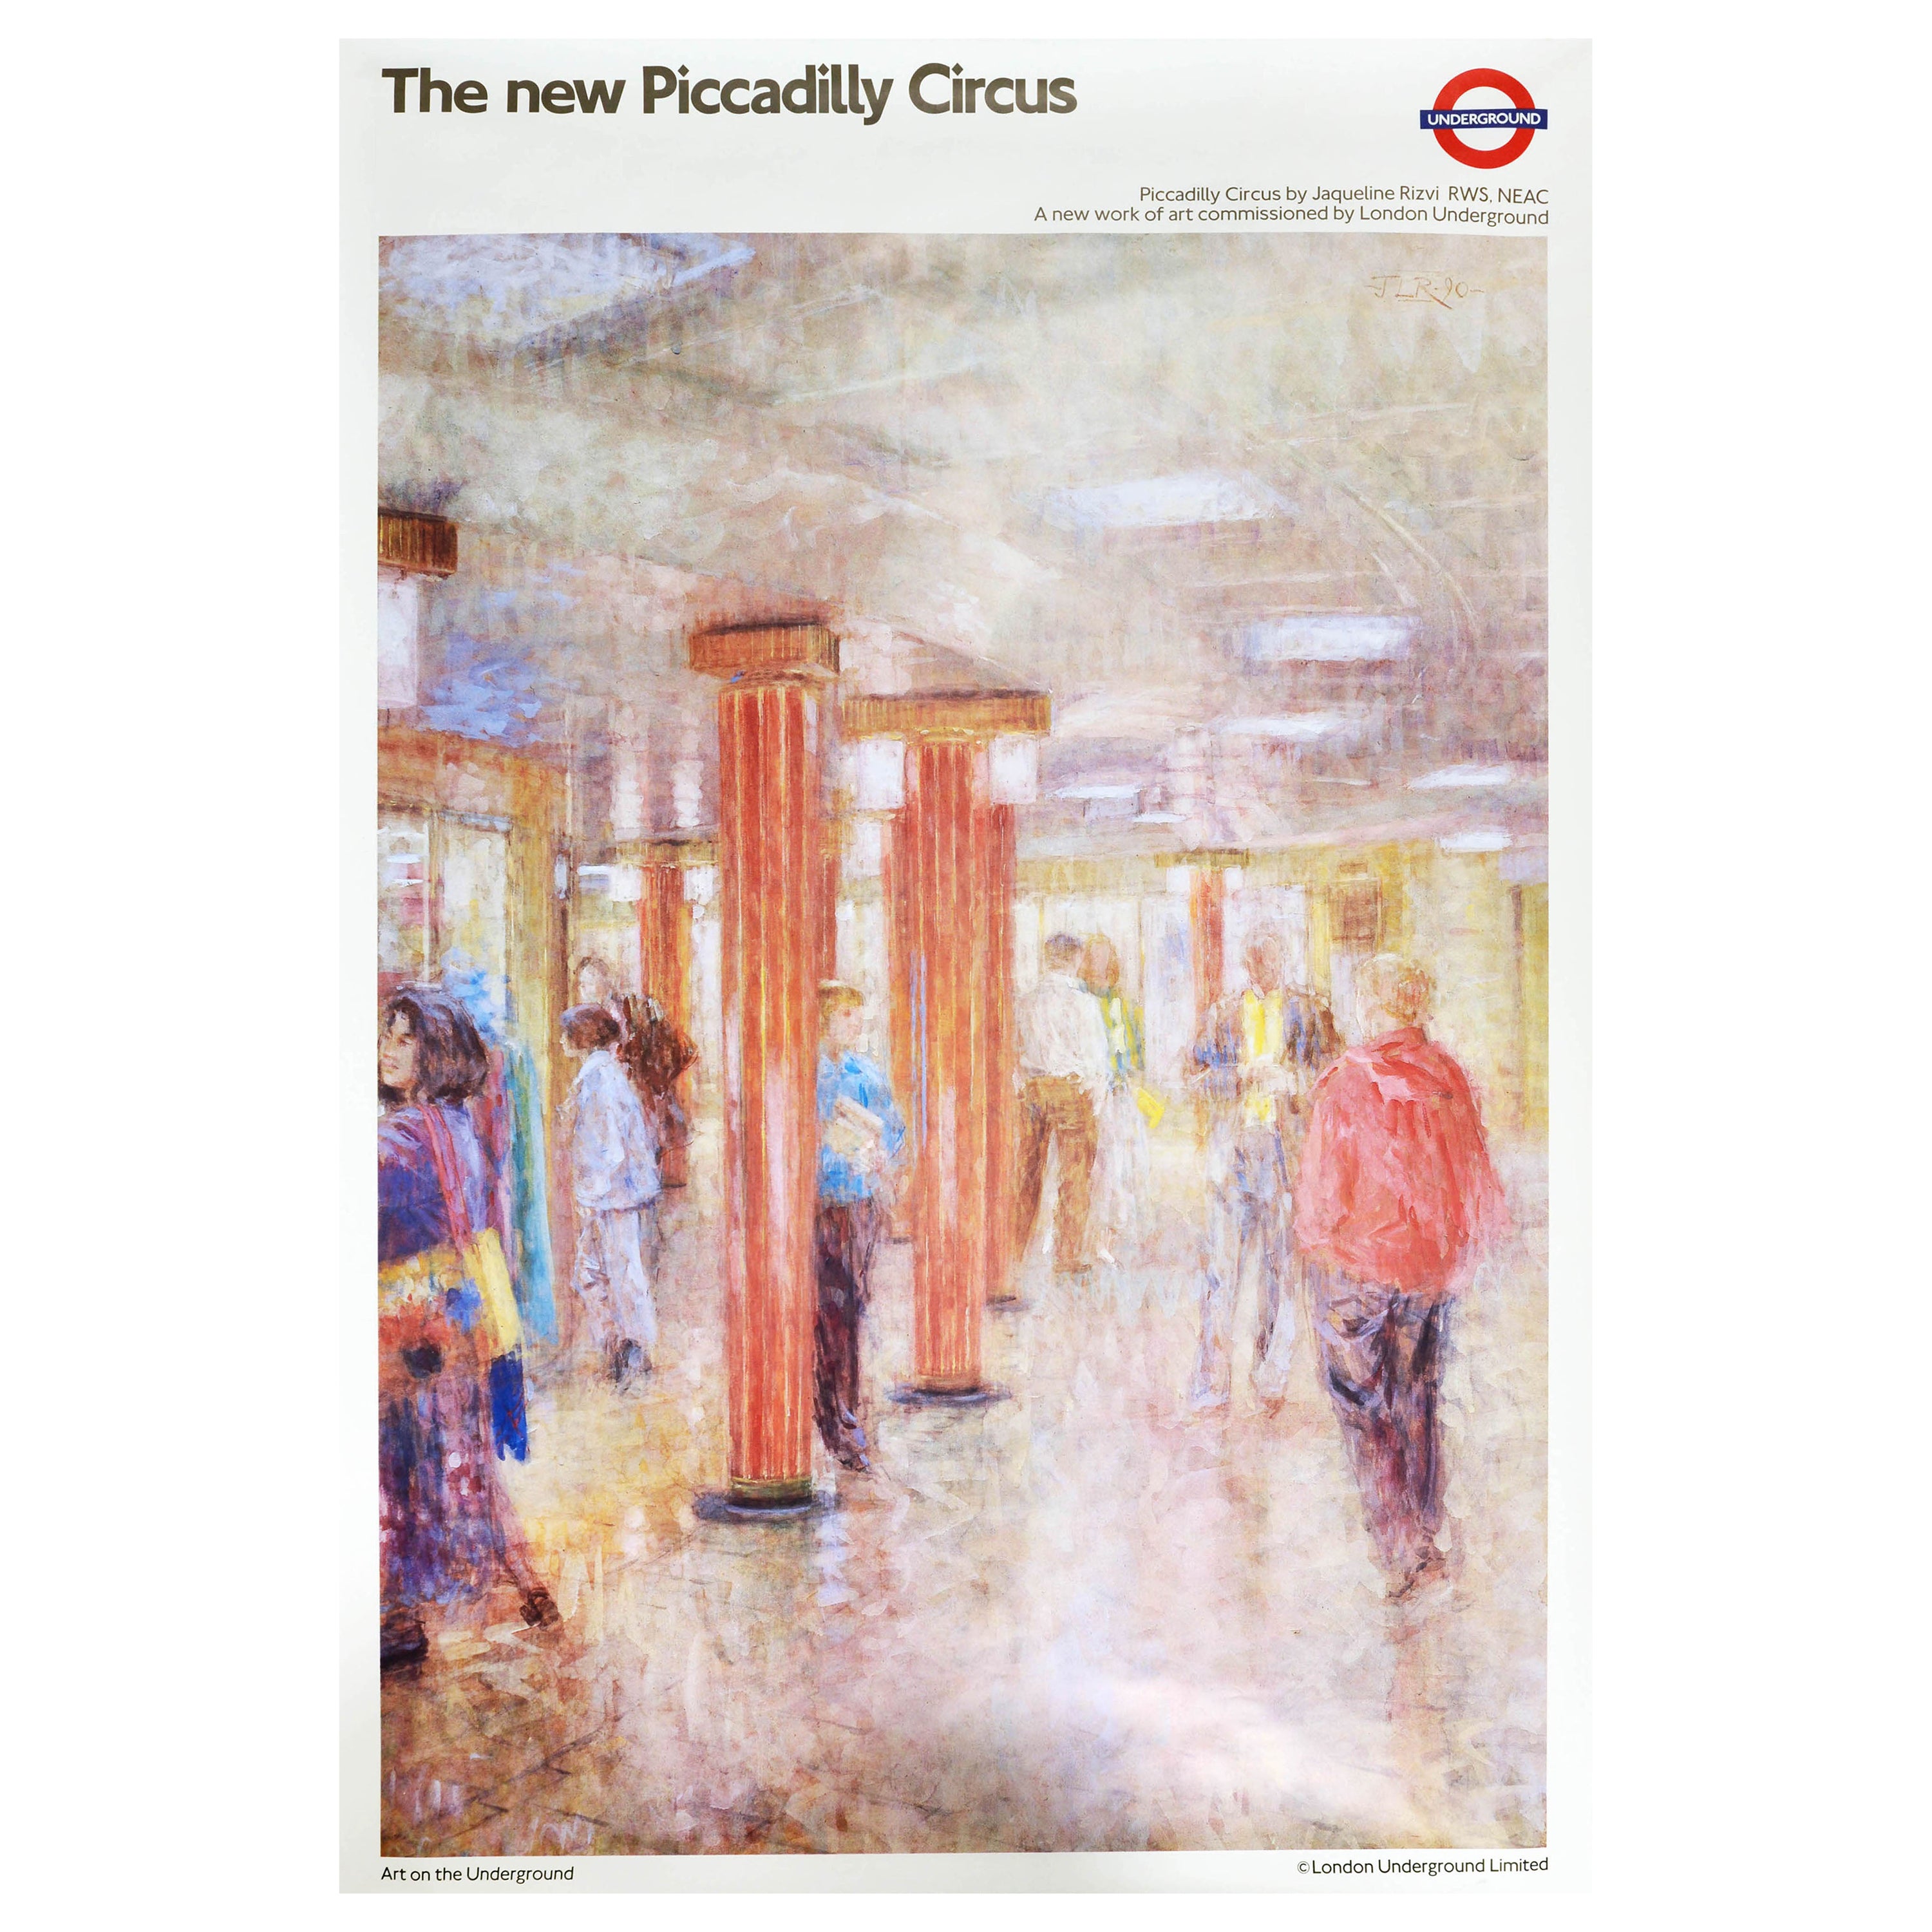 Original Vintage London Underground Poster Piccadilly Circus Tube Design Art For Sale